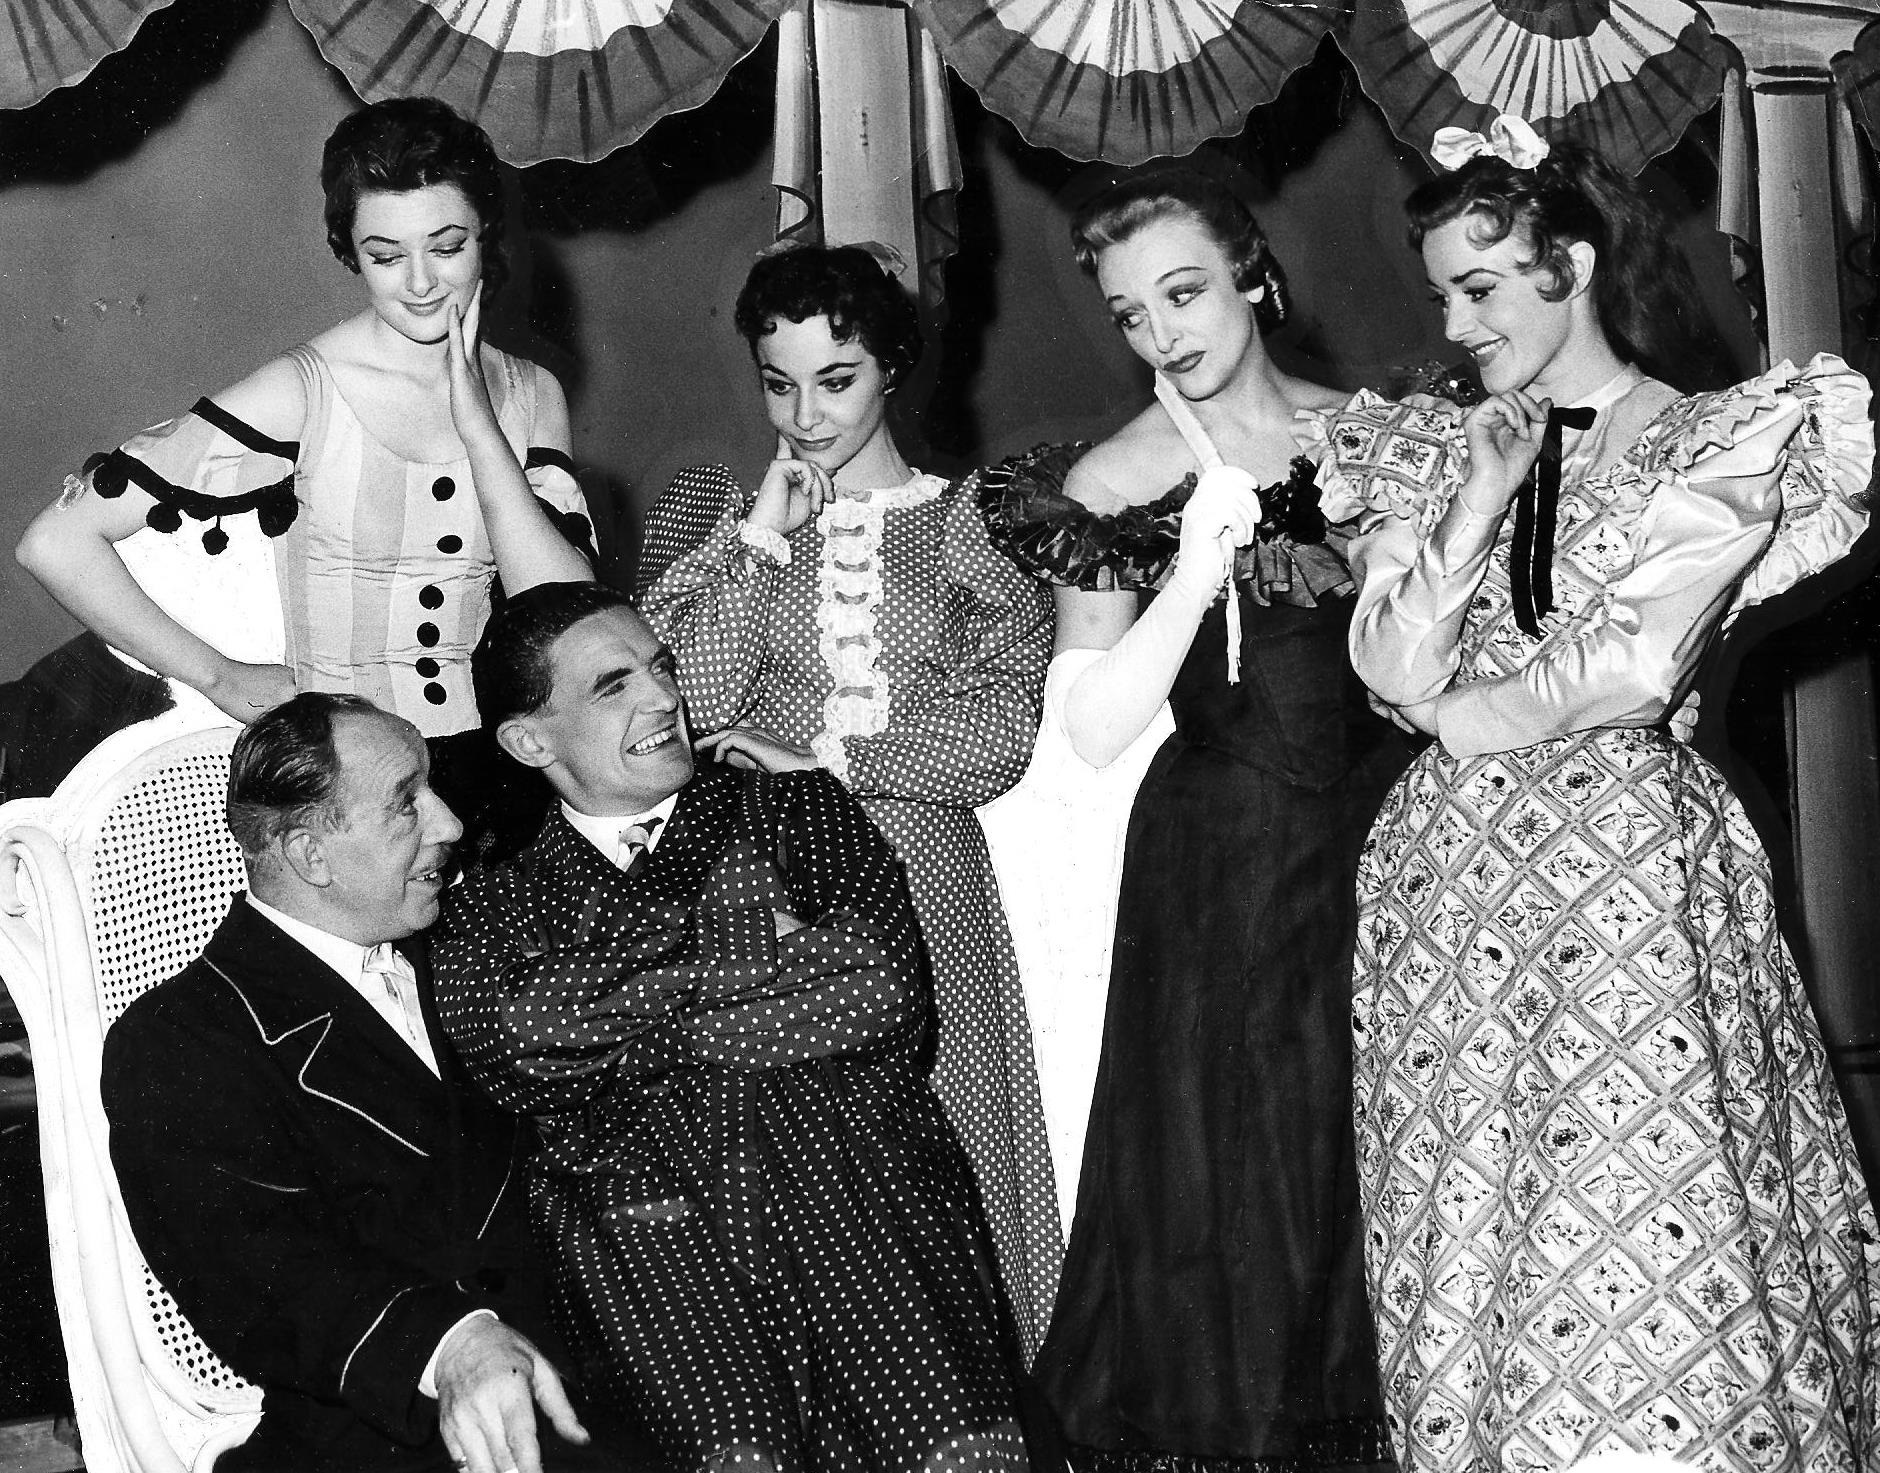 Olga Gwynne, Joanna Rigby, Katherine Feather and Margaret Miles, with Jack Radcliffe and Jimmy Logan in 1955 